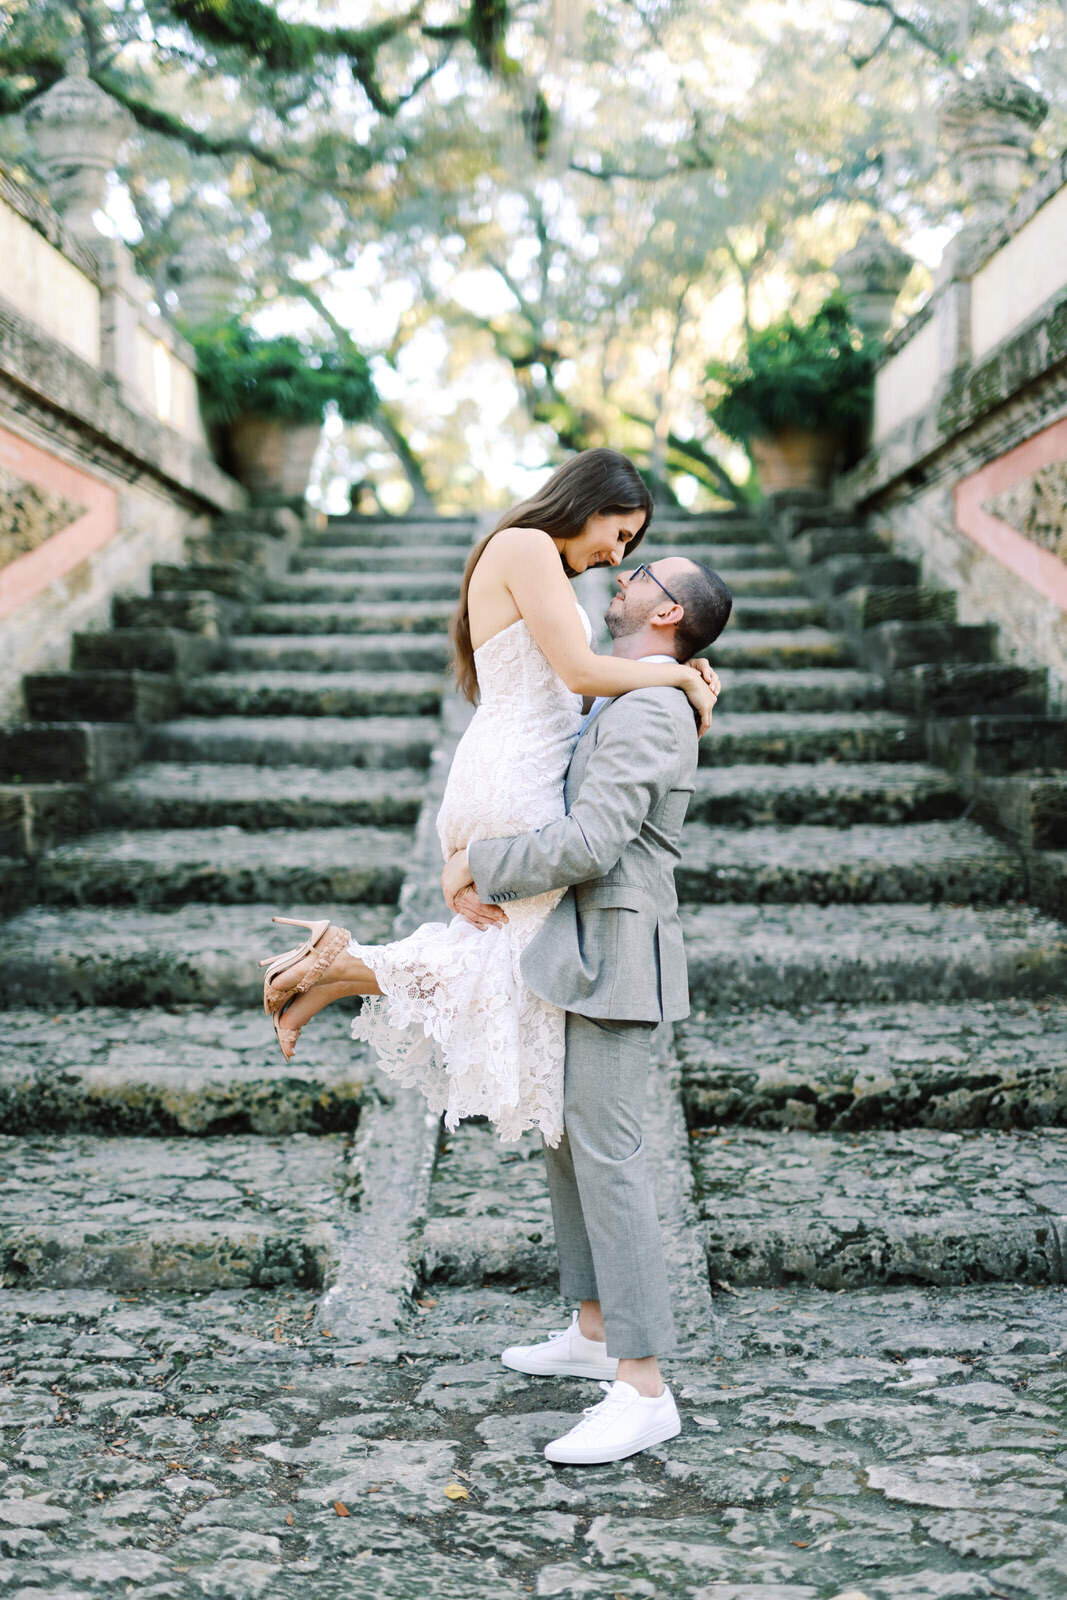 A Stylish and Chic Engagement Session at Vizcaya Museum in Miami Florida 28